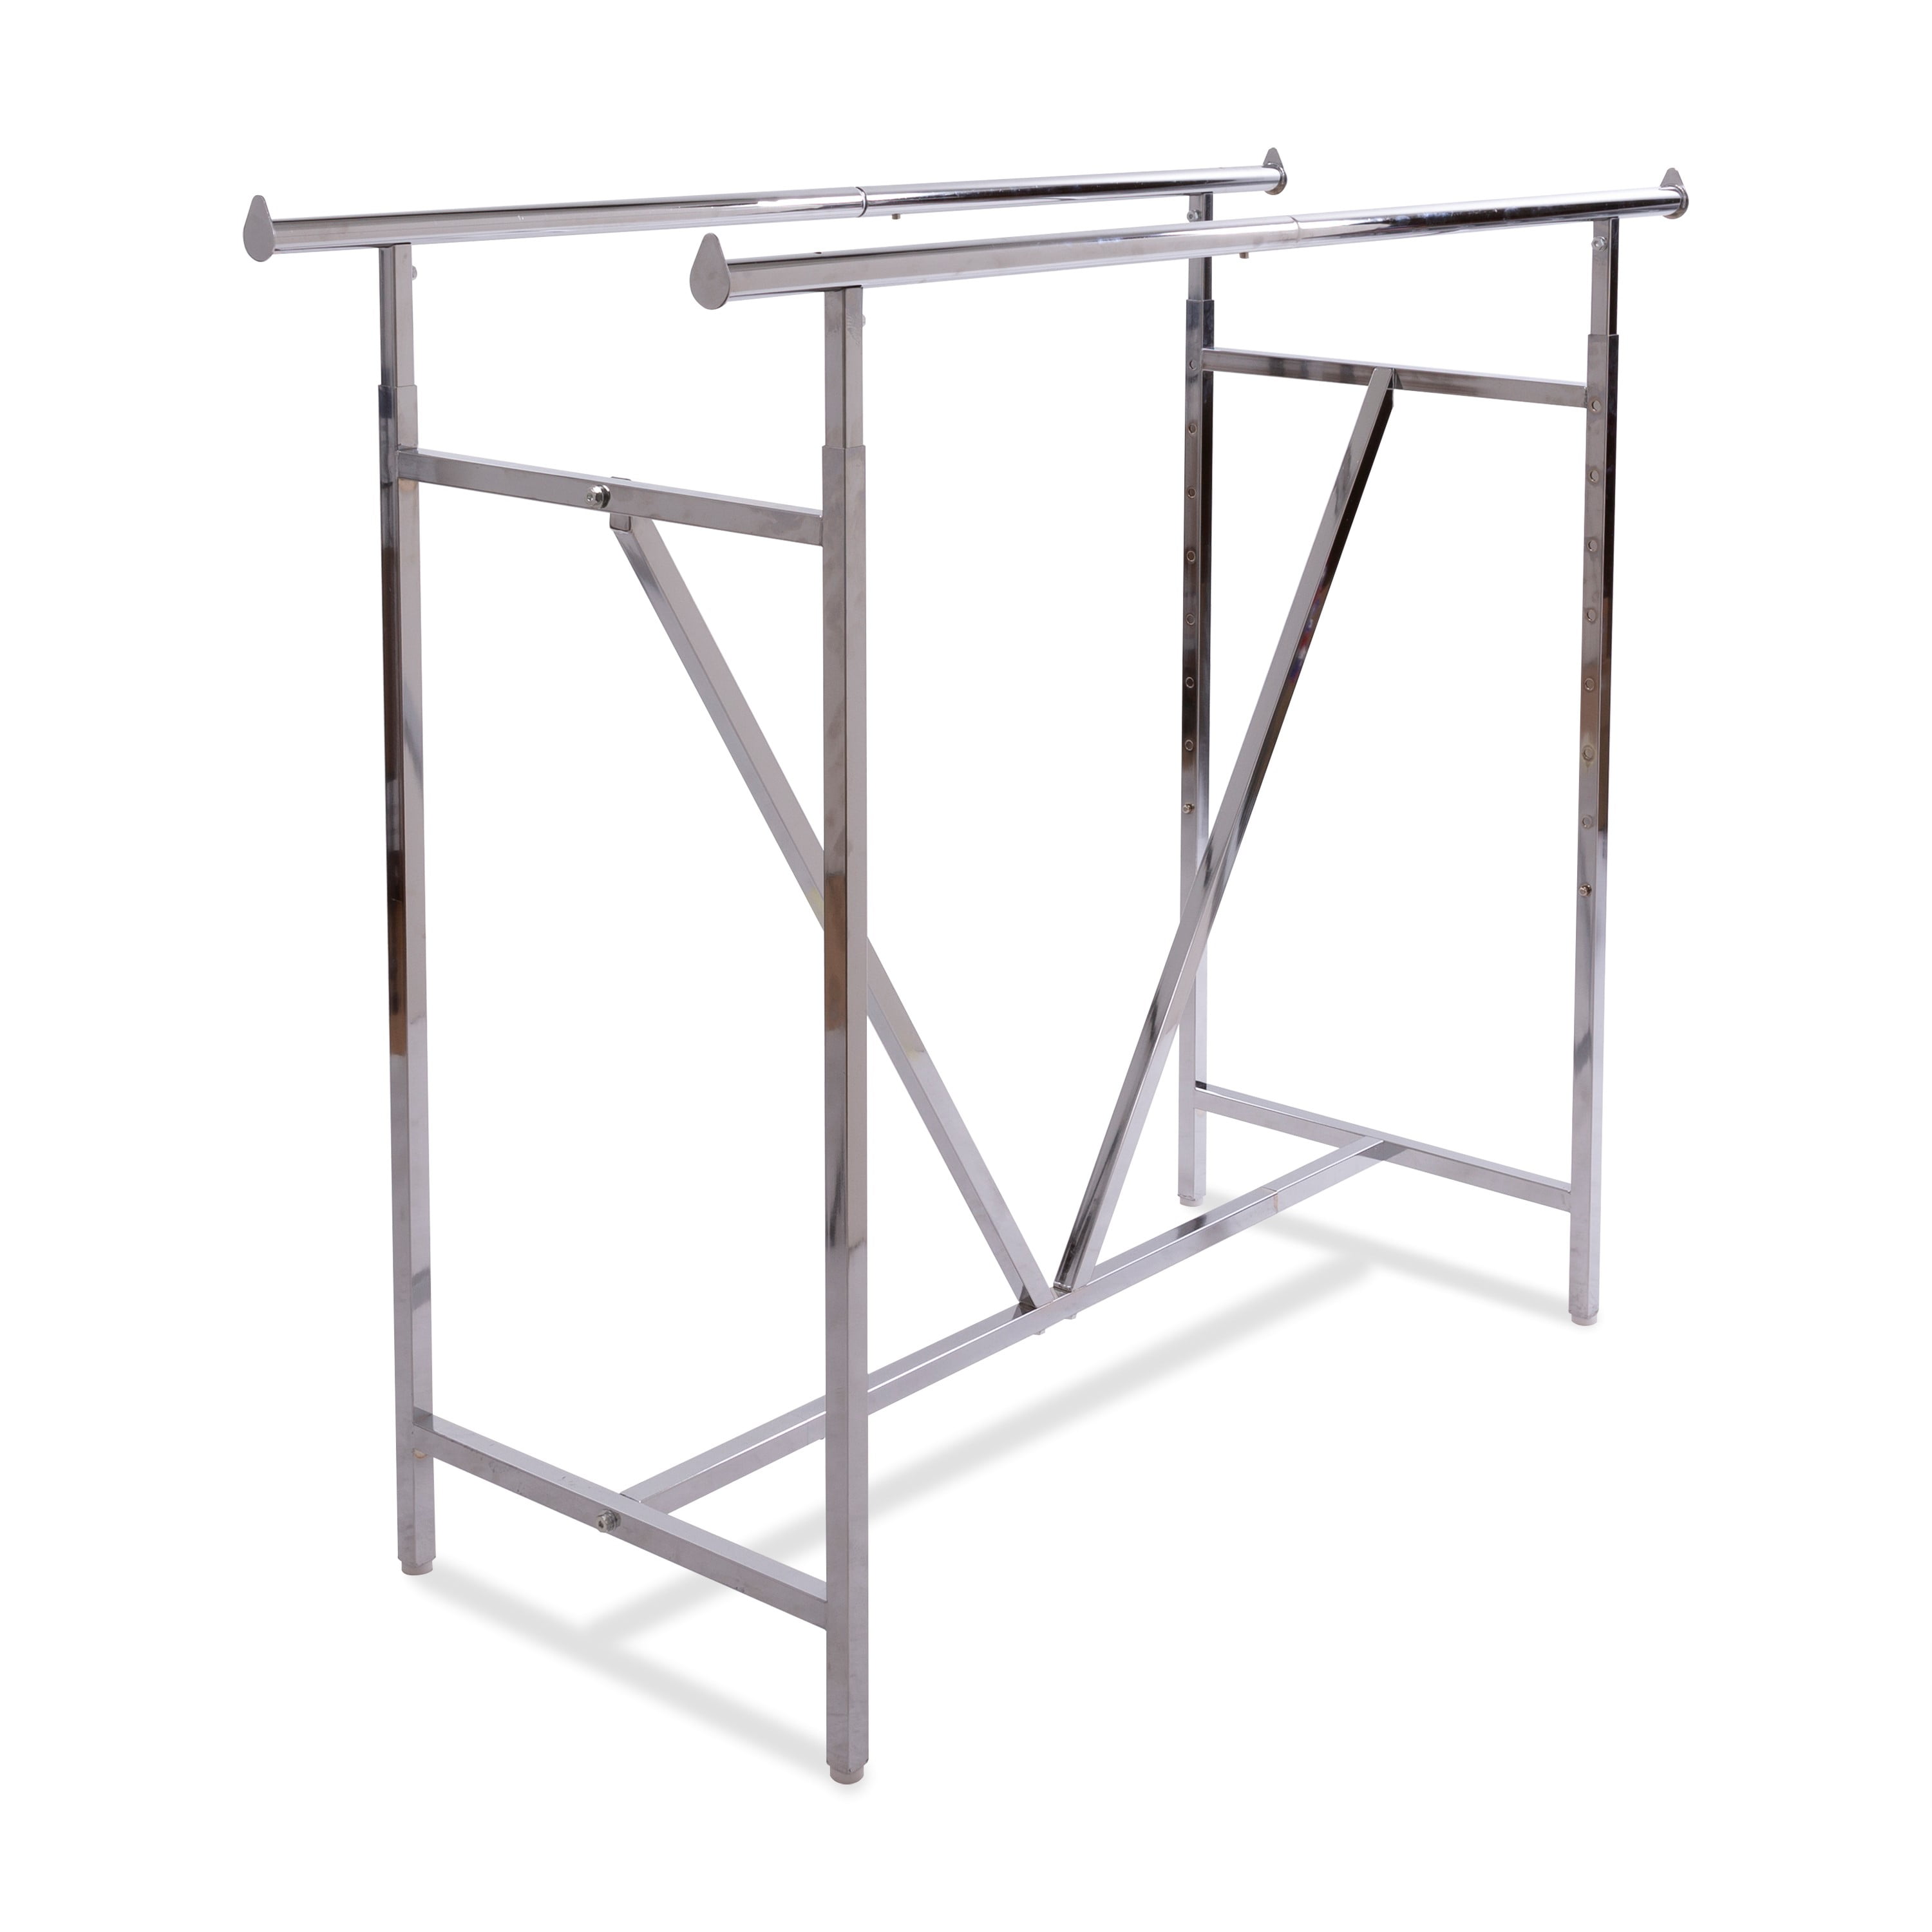 Commercial Heavy Duty Clothing Garment Rolling Collapsible Rack Double-Bar Steel 